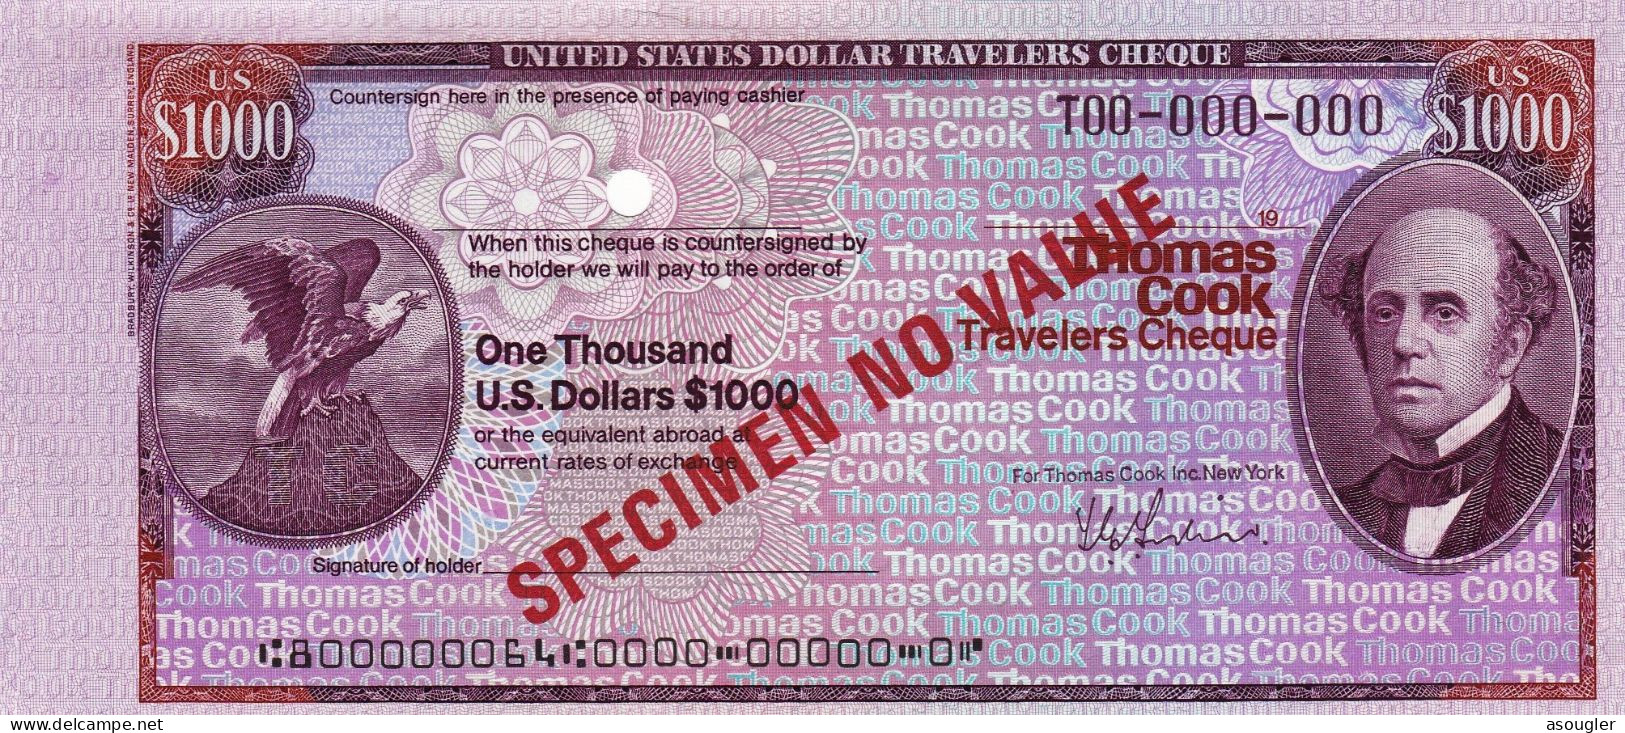 USA 1000 DOLLARS SPECIMEN THOMAS COOK TRAVELERS CHEQUE 1978-1979 "free Shipping Via Registered Air Mail" - A Identifier